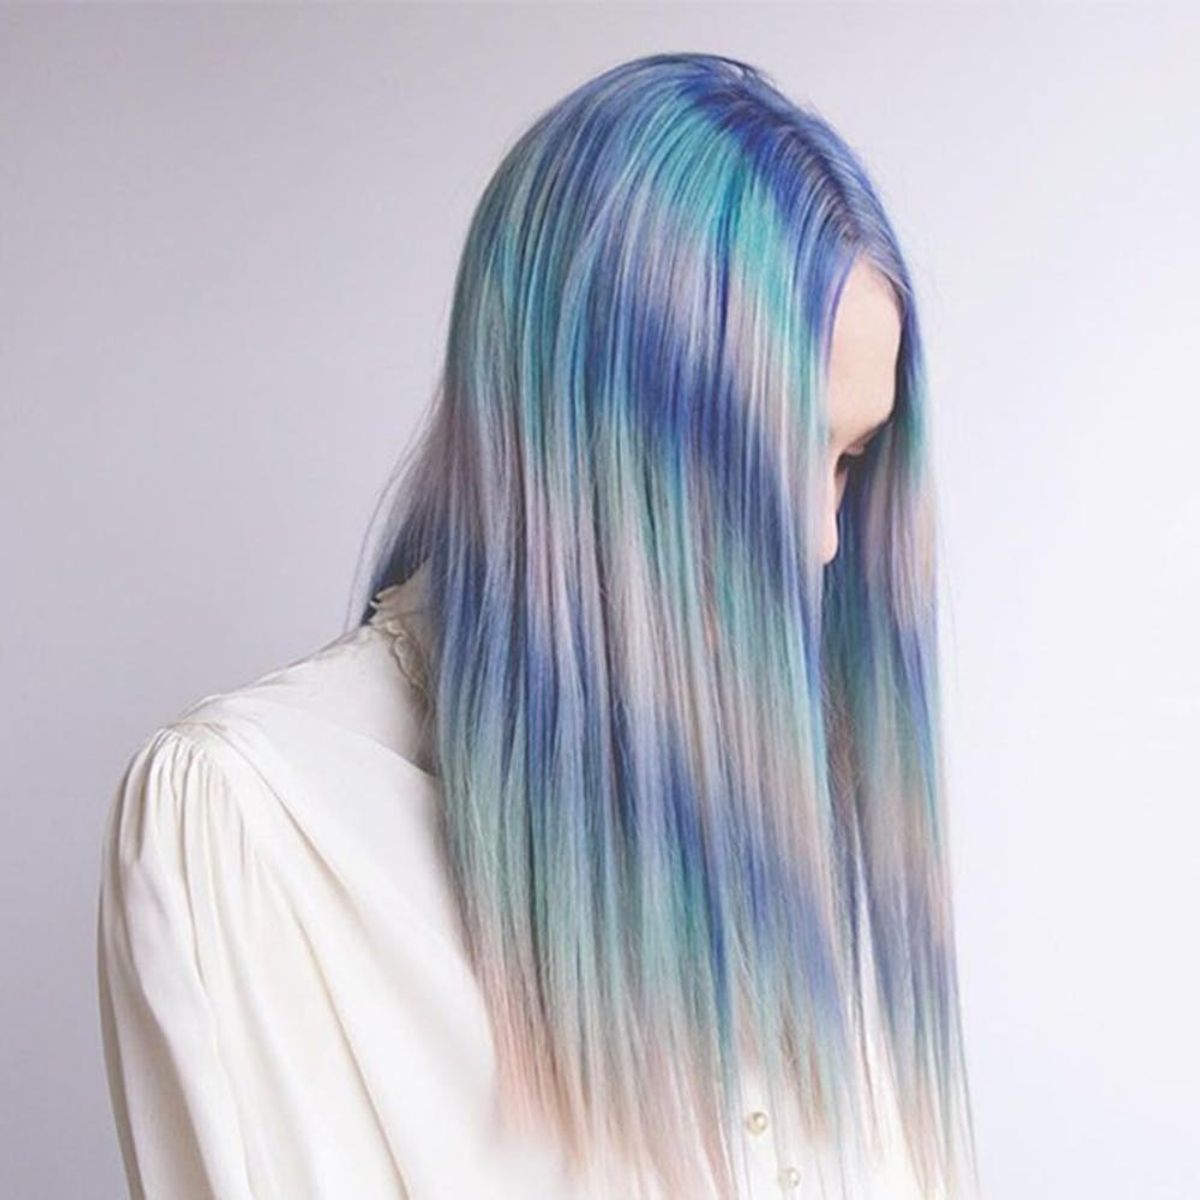 14 Pastel Hairstyles to Get You Pumped for Spring